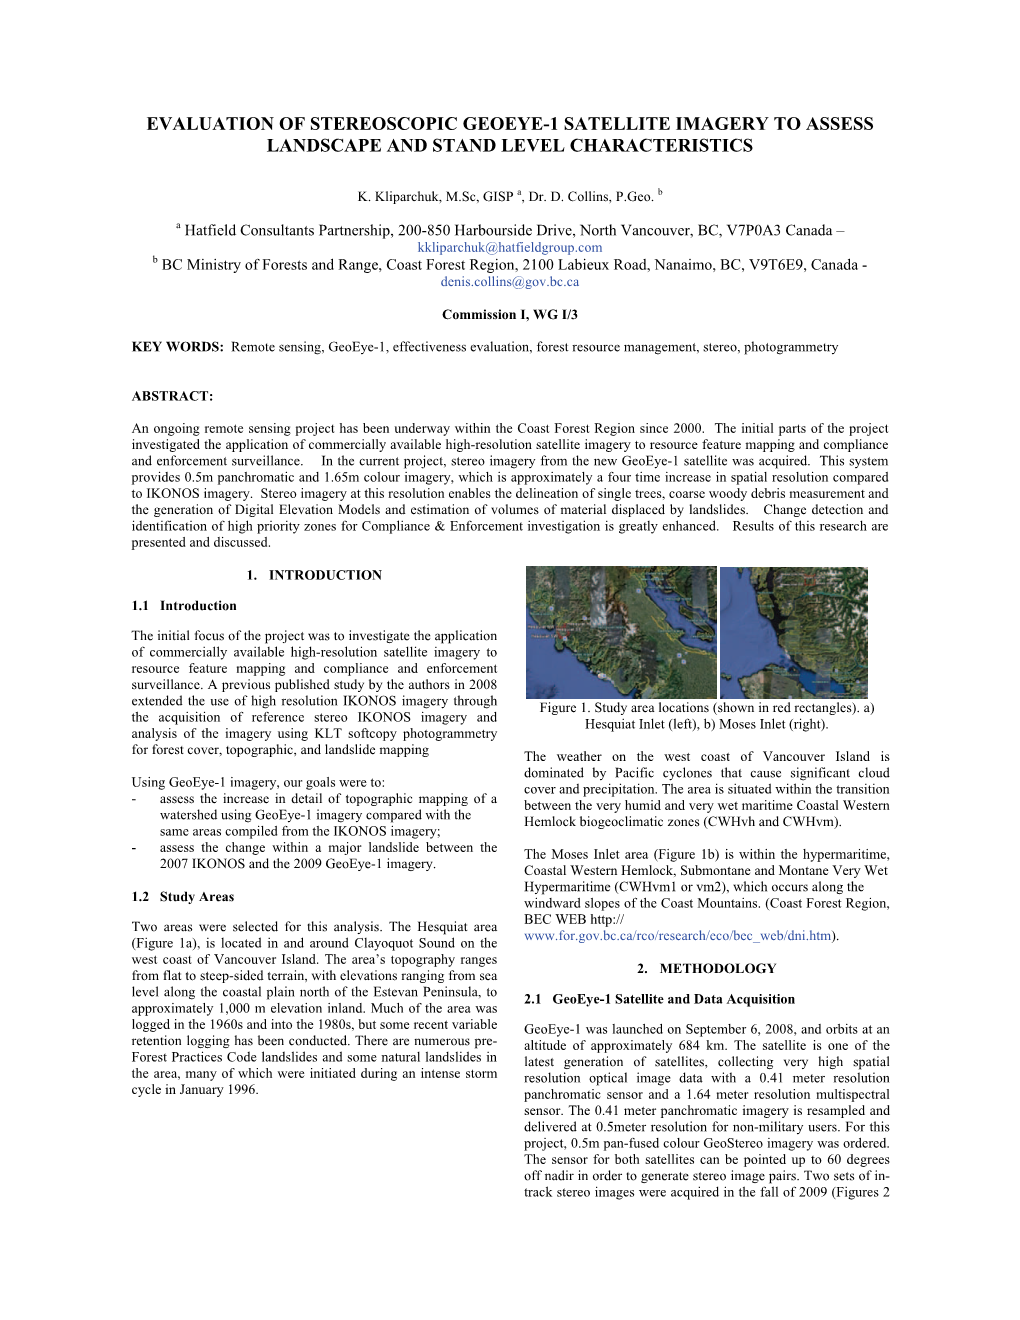 Evaluation of Stereoscopic Geoeye-1 Satellite Imagery to Assess Landscape and Stand Level Characteristics